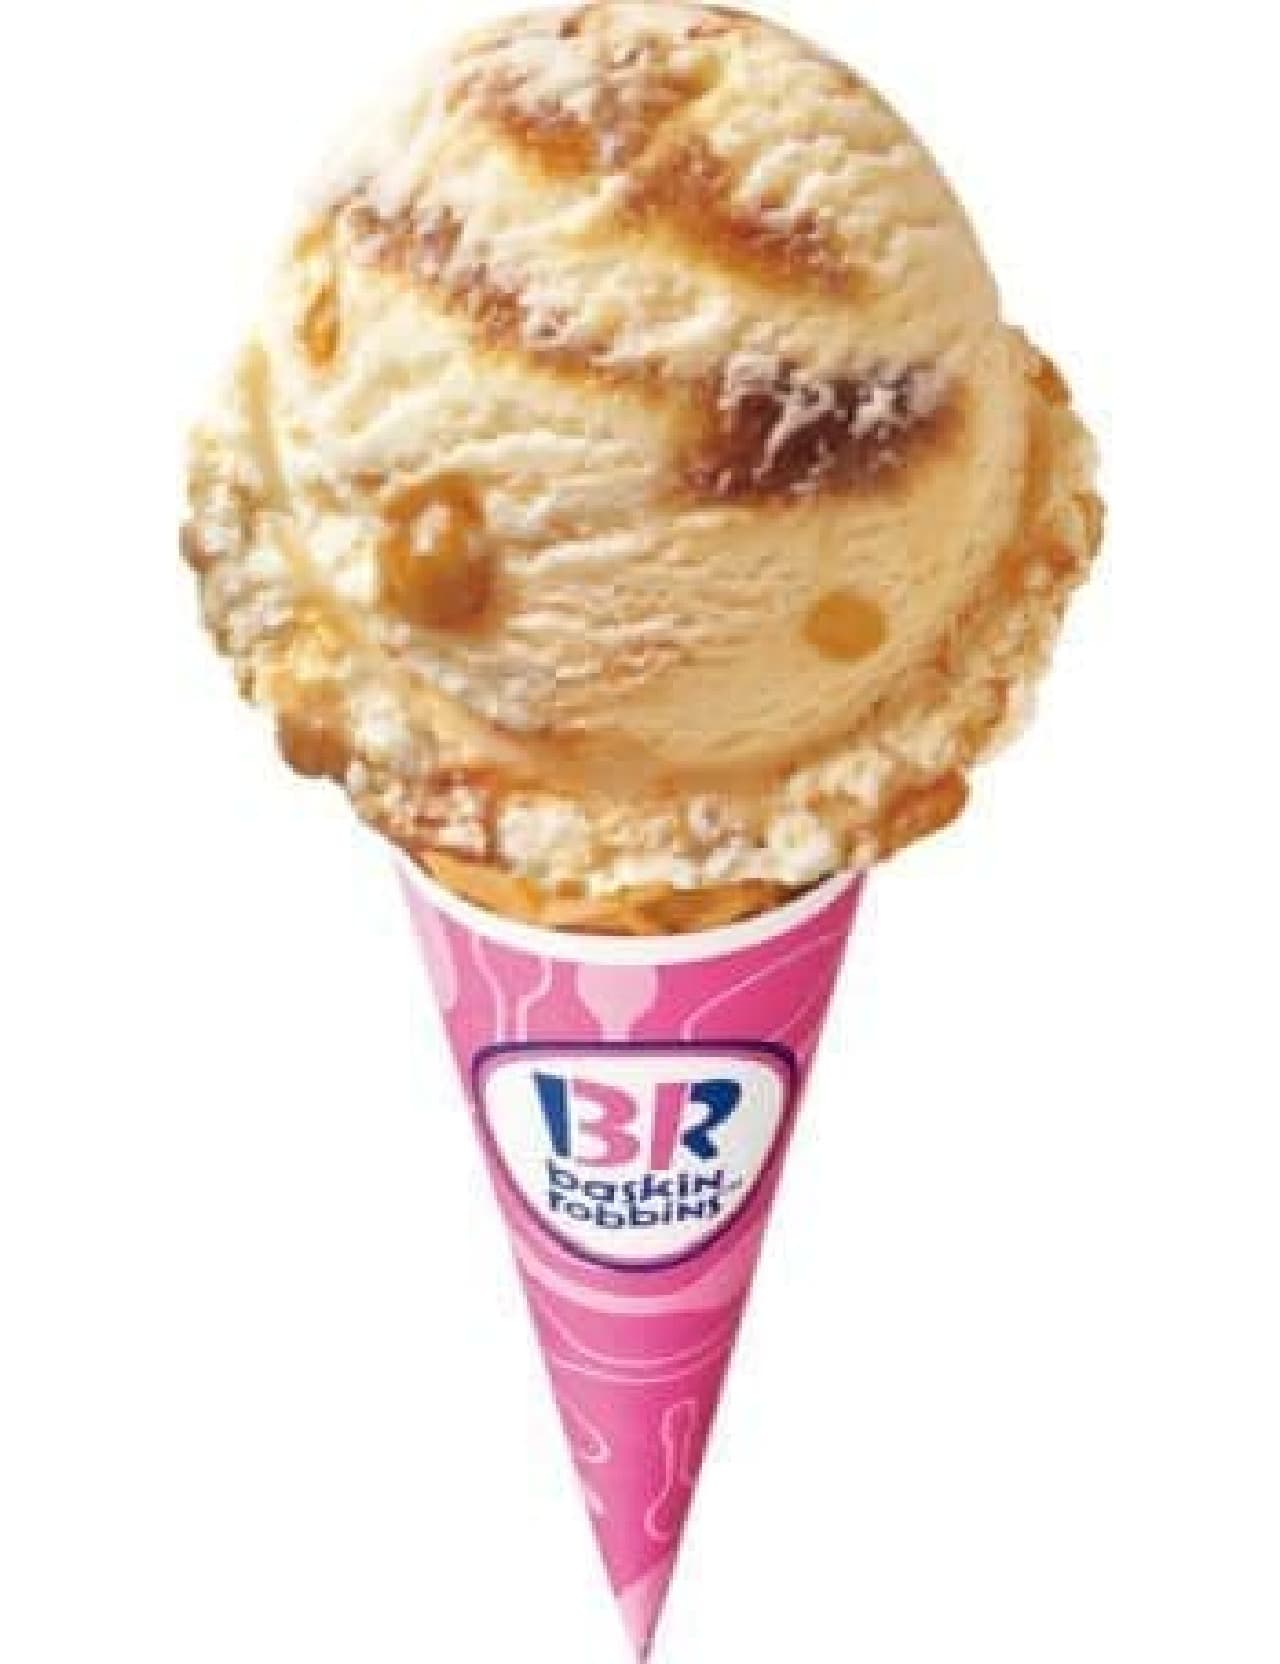 "Caramel Crunch Candy" is a flavor of New Zealand ice cream "Hokey Pokey" arranged in a thirty-one style.